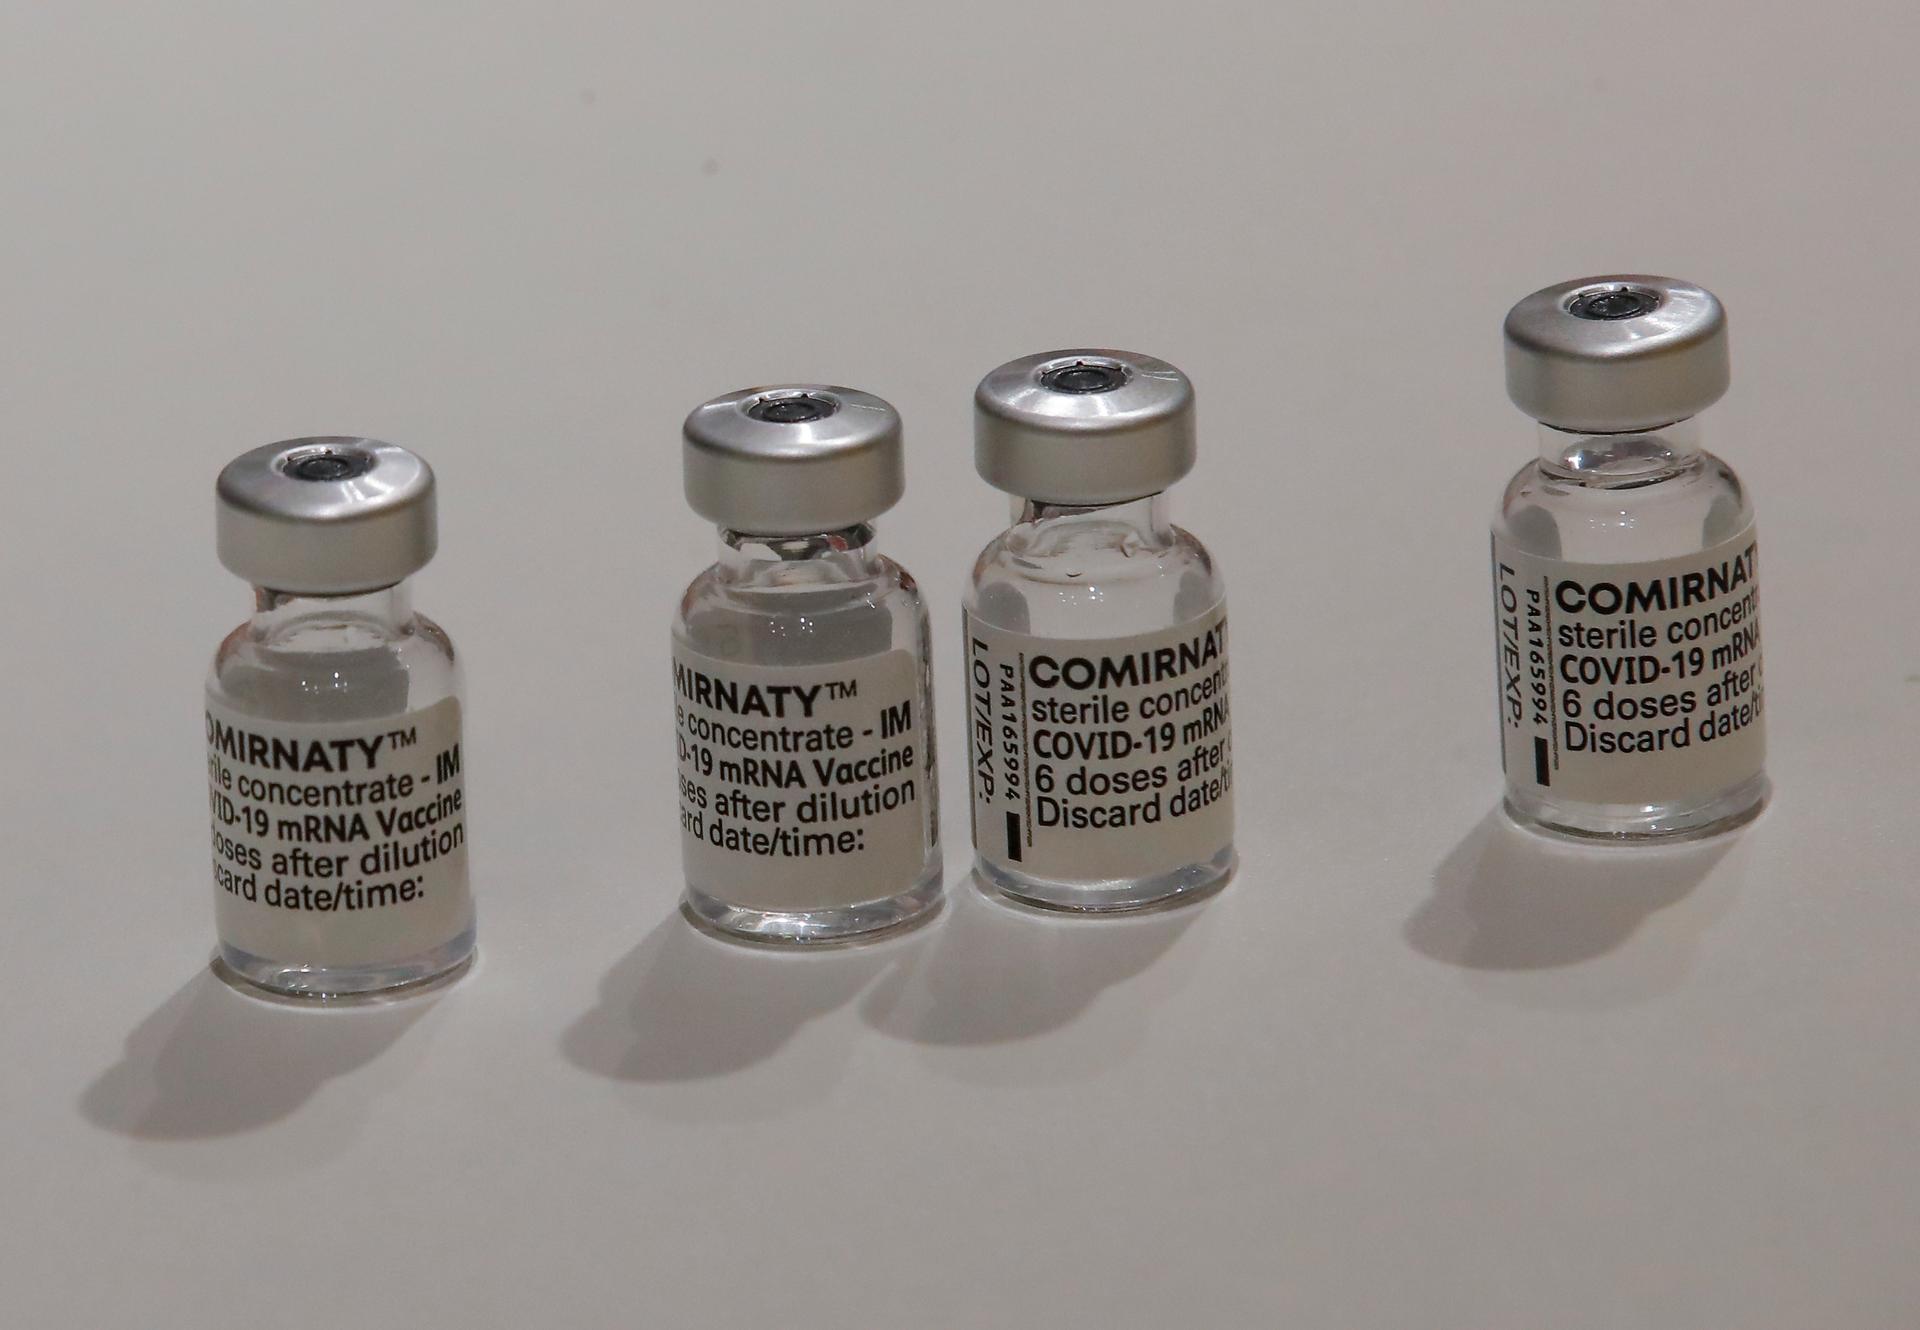 Four vials of the COVID-19 vaccine doses